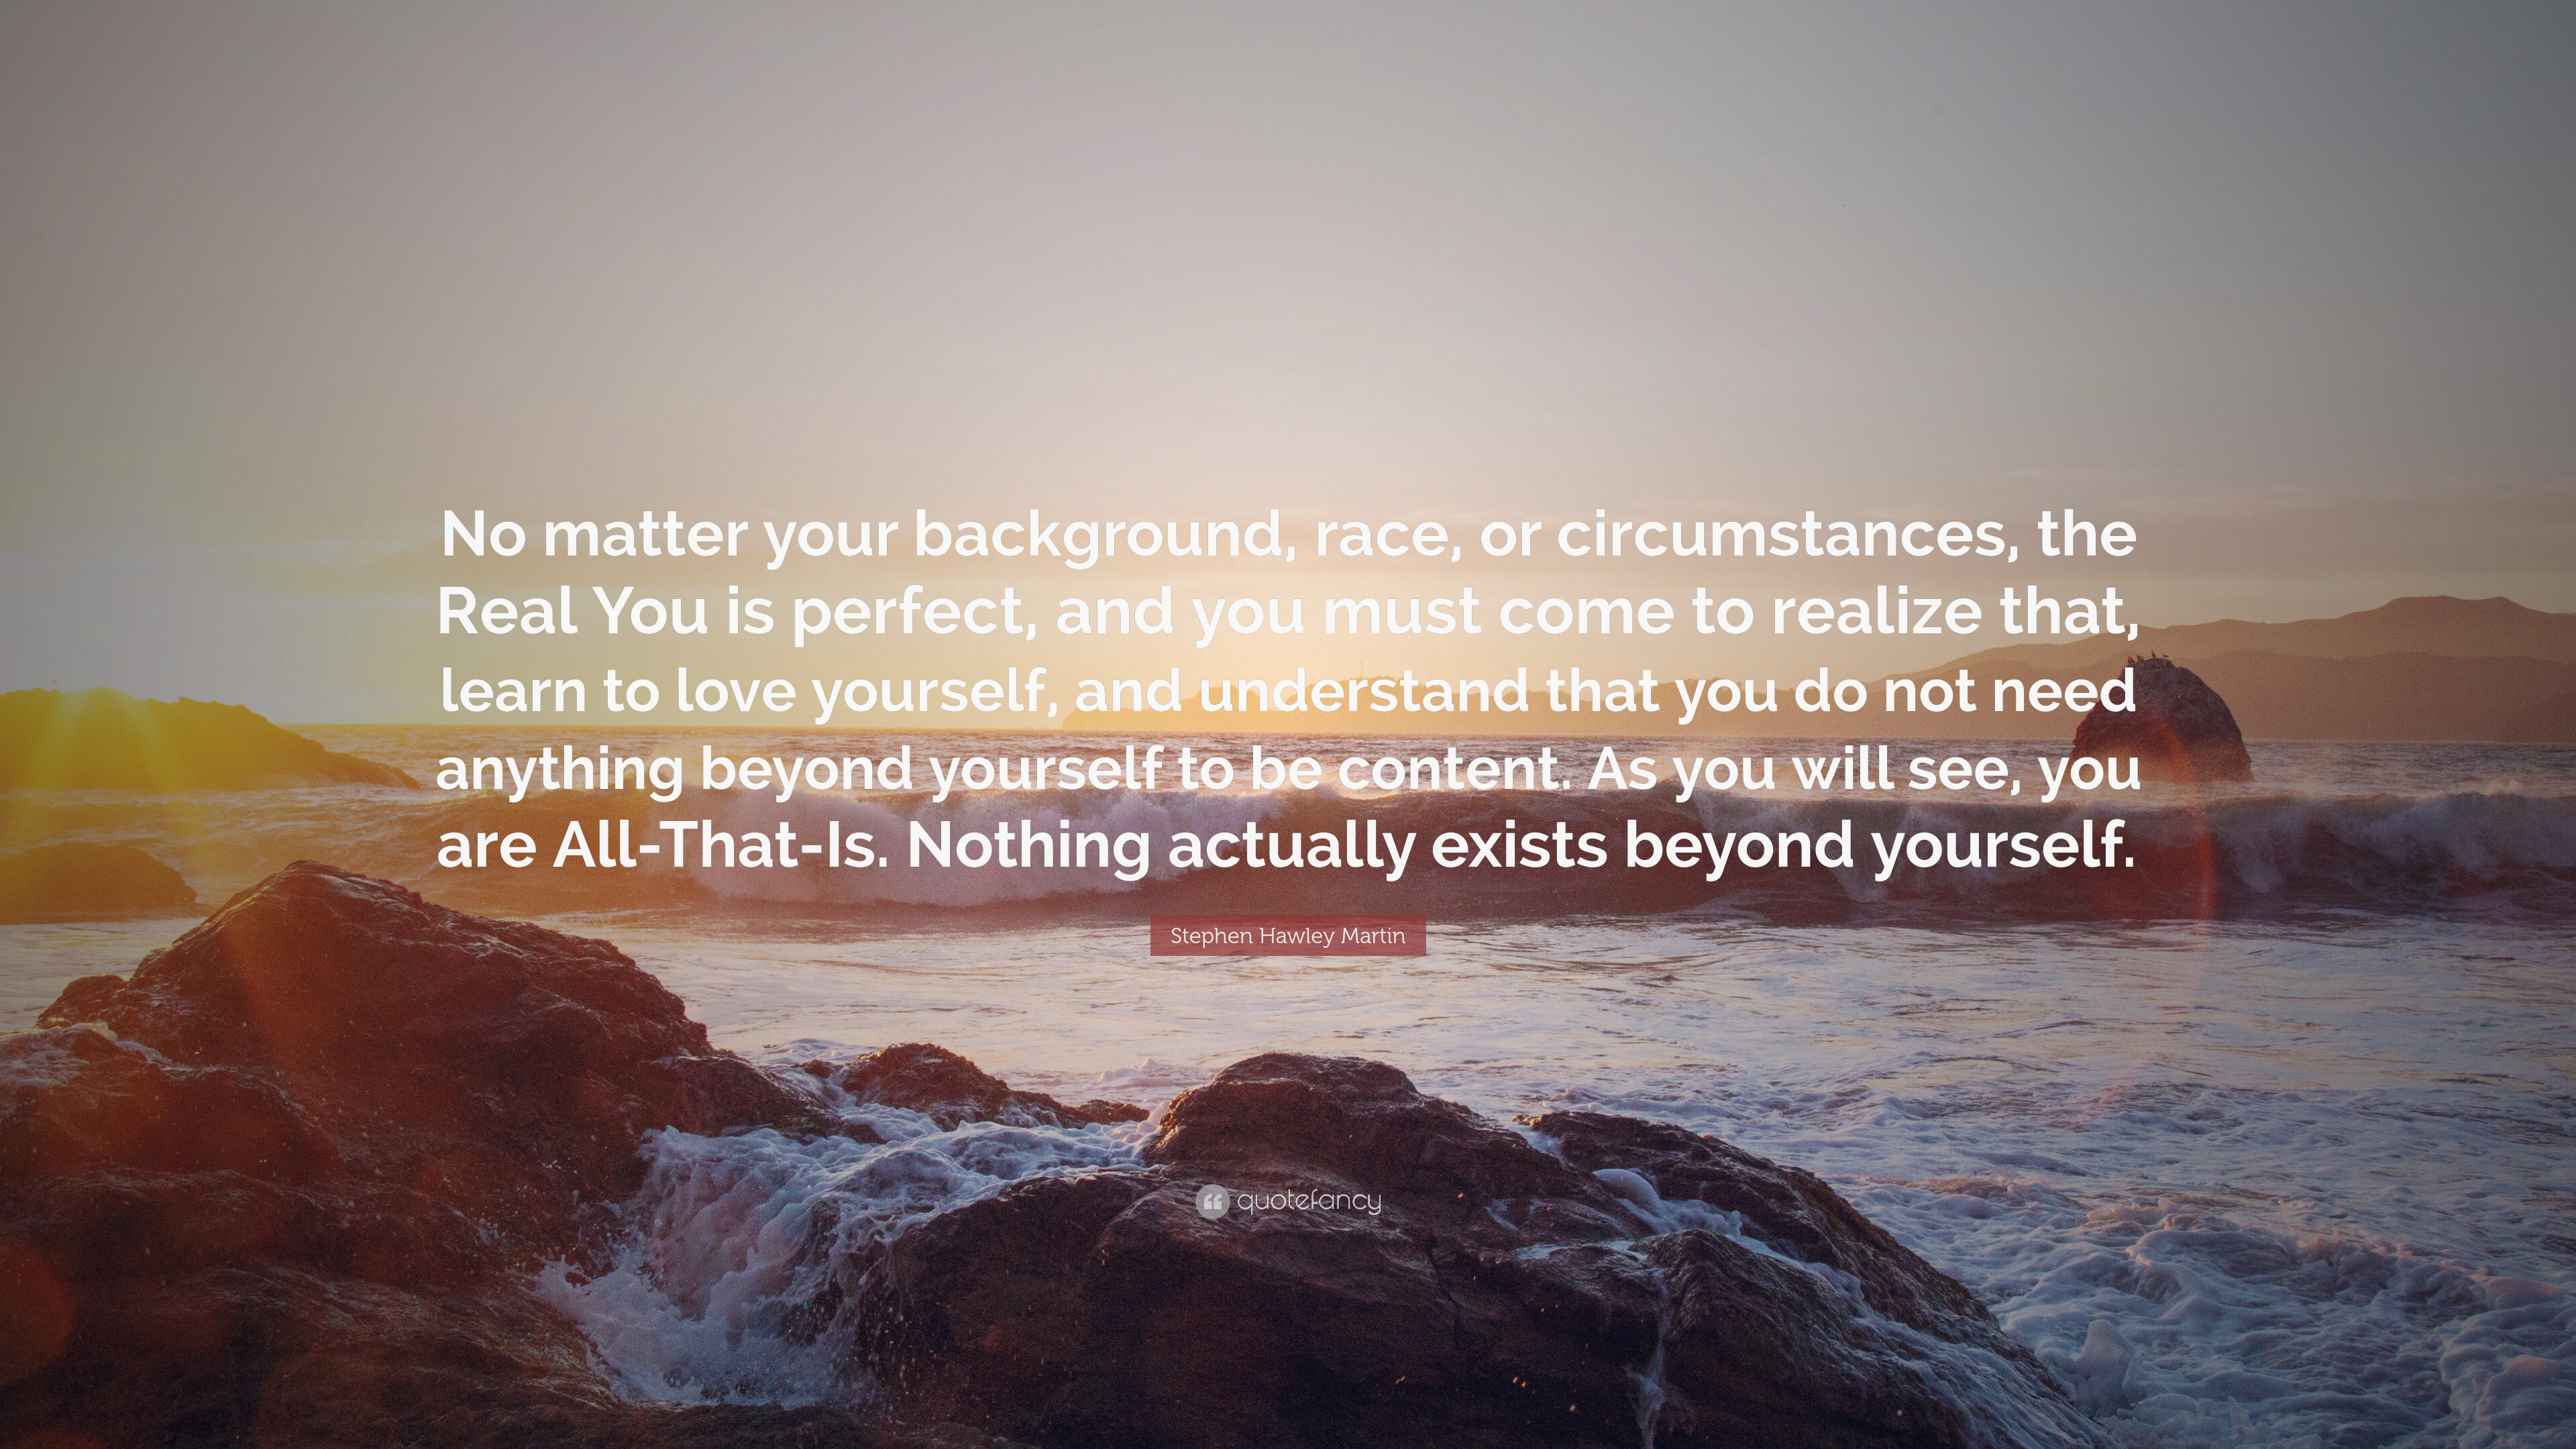 Stephen Hawley Martin Quote: “No matter your background, race, or  circumstances, the Real You is perfect, and you must come to realize that,  learn to ...”